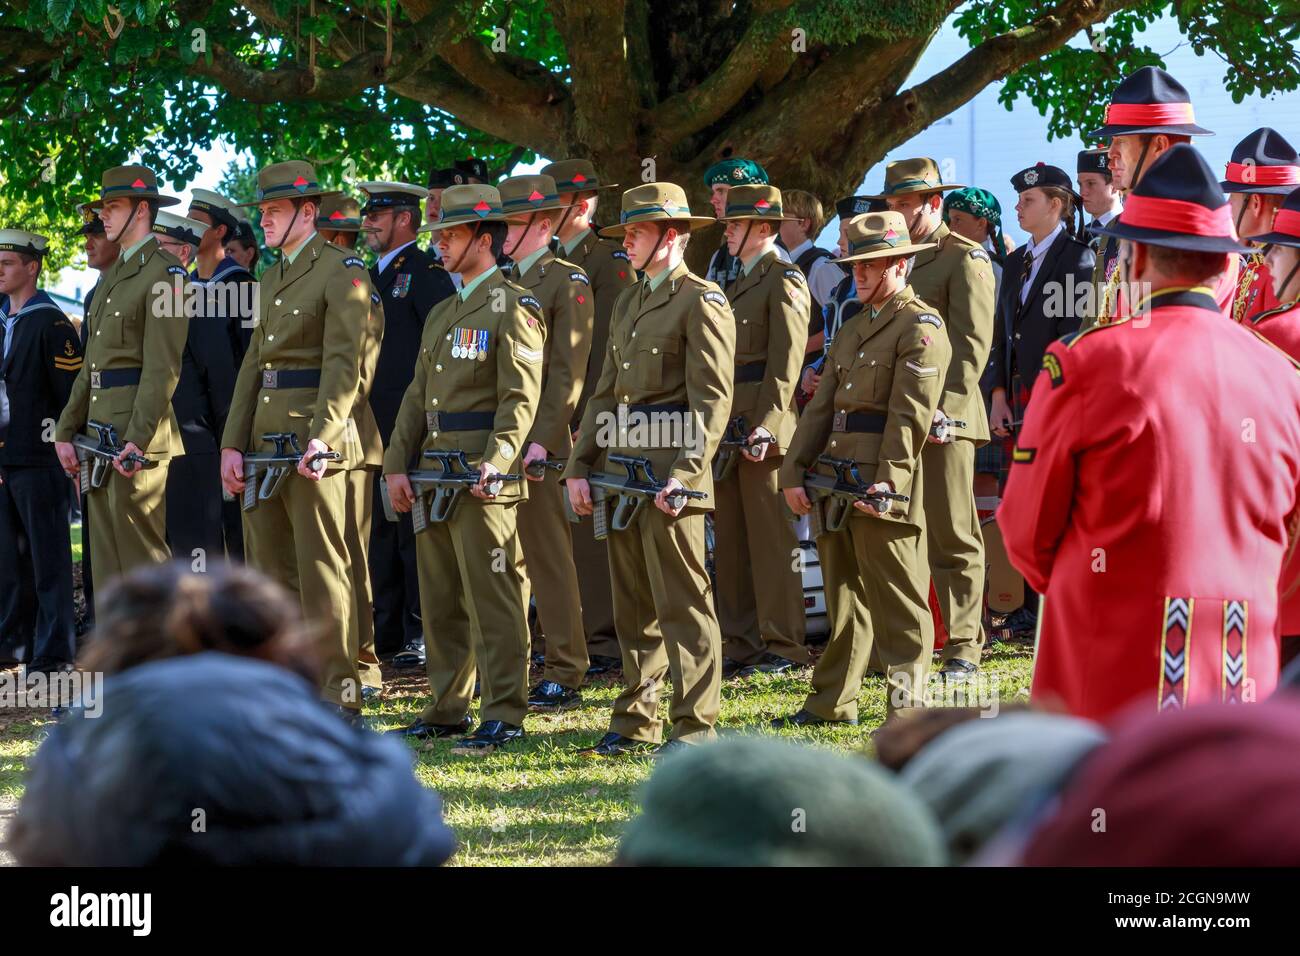 Members of the New Zealand Armed Forces (Army, Navy and Sea Cadets) at the 150th Anniversary Commemoration of the Batlle of Gate Pa, Tauranga, NZ, Stock Photo